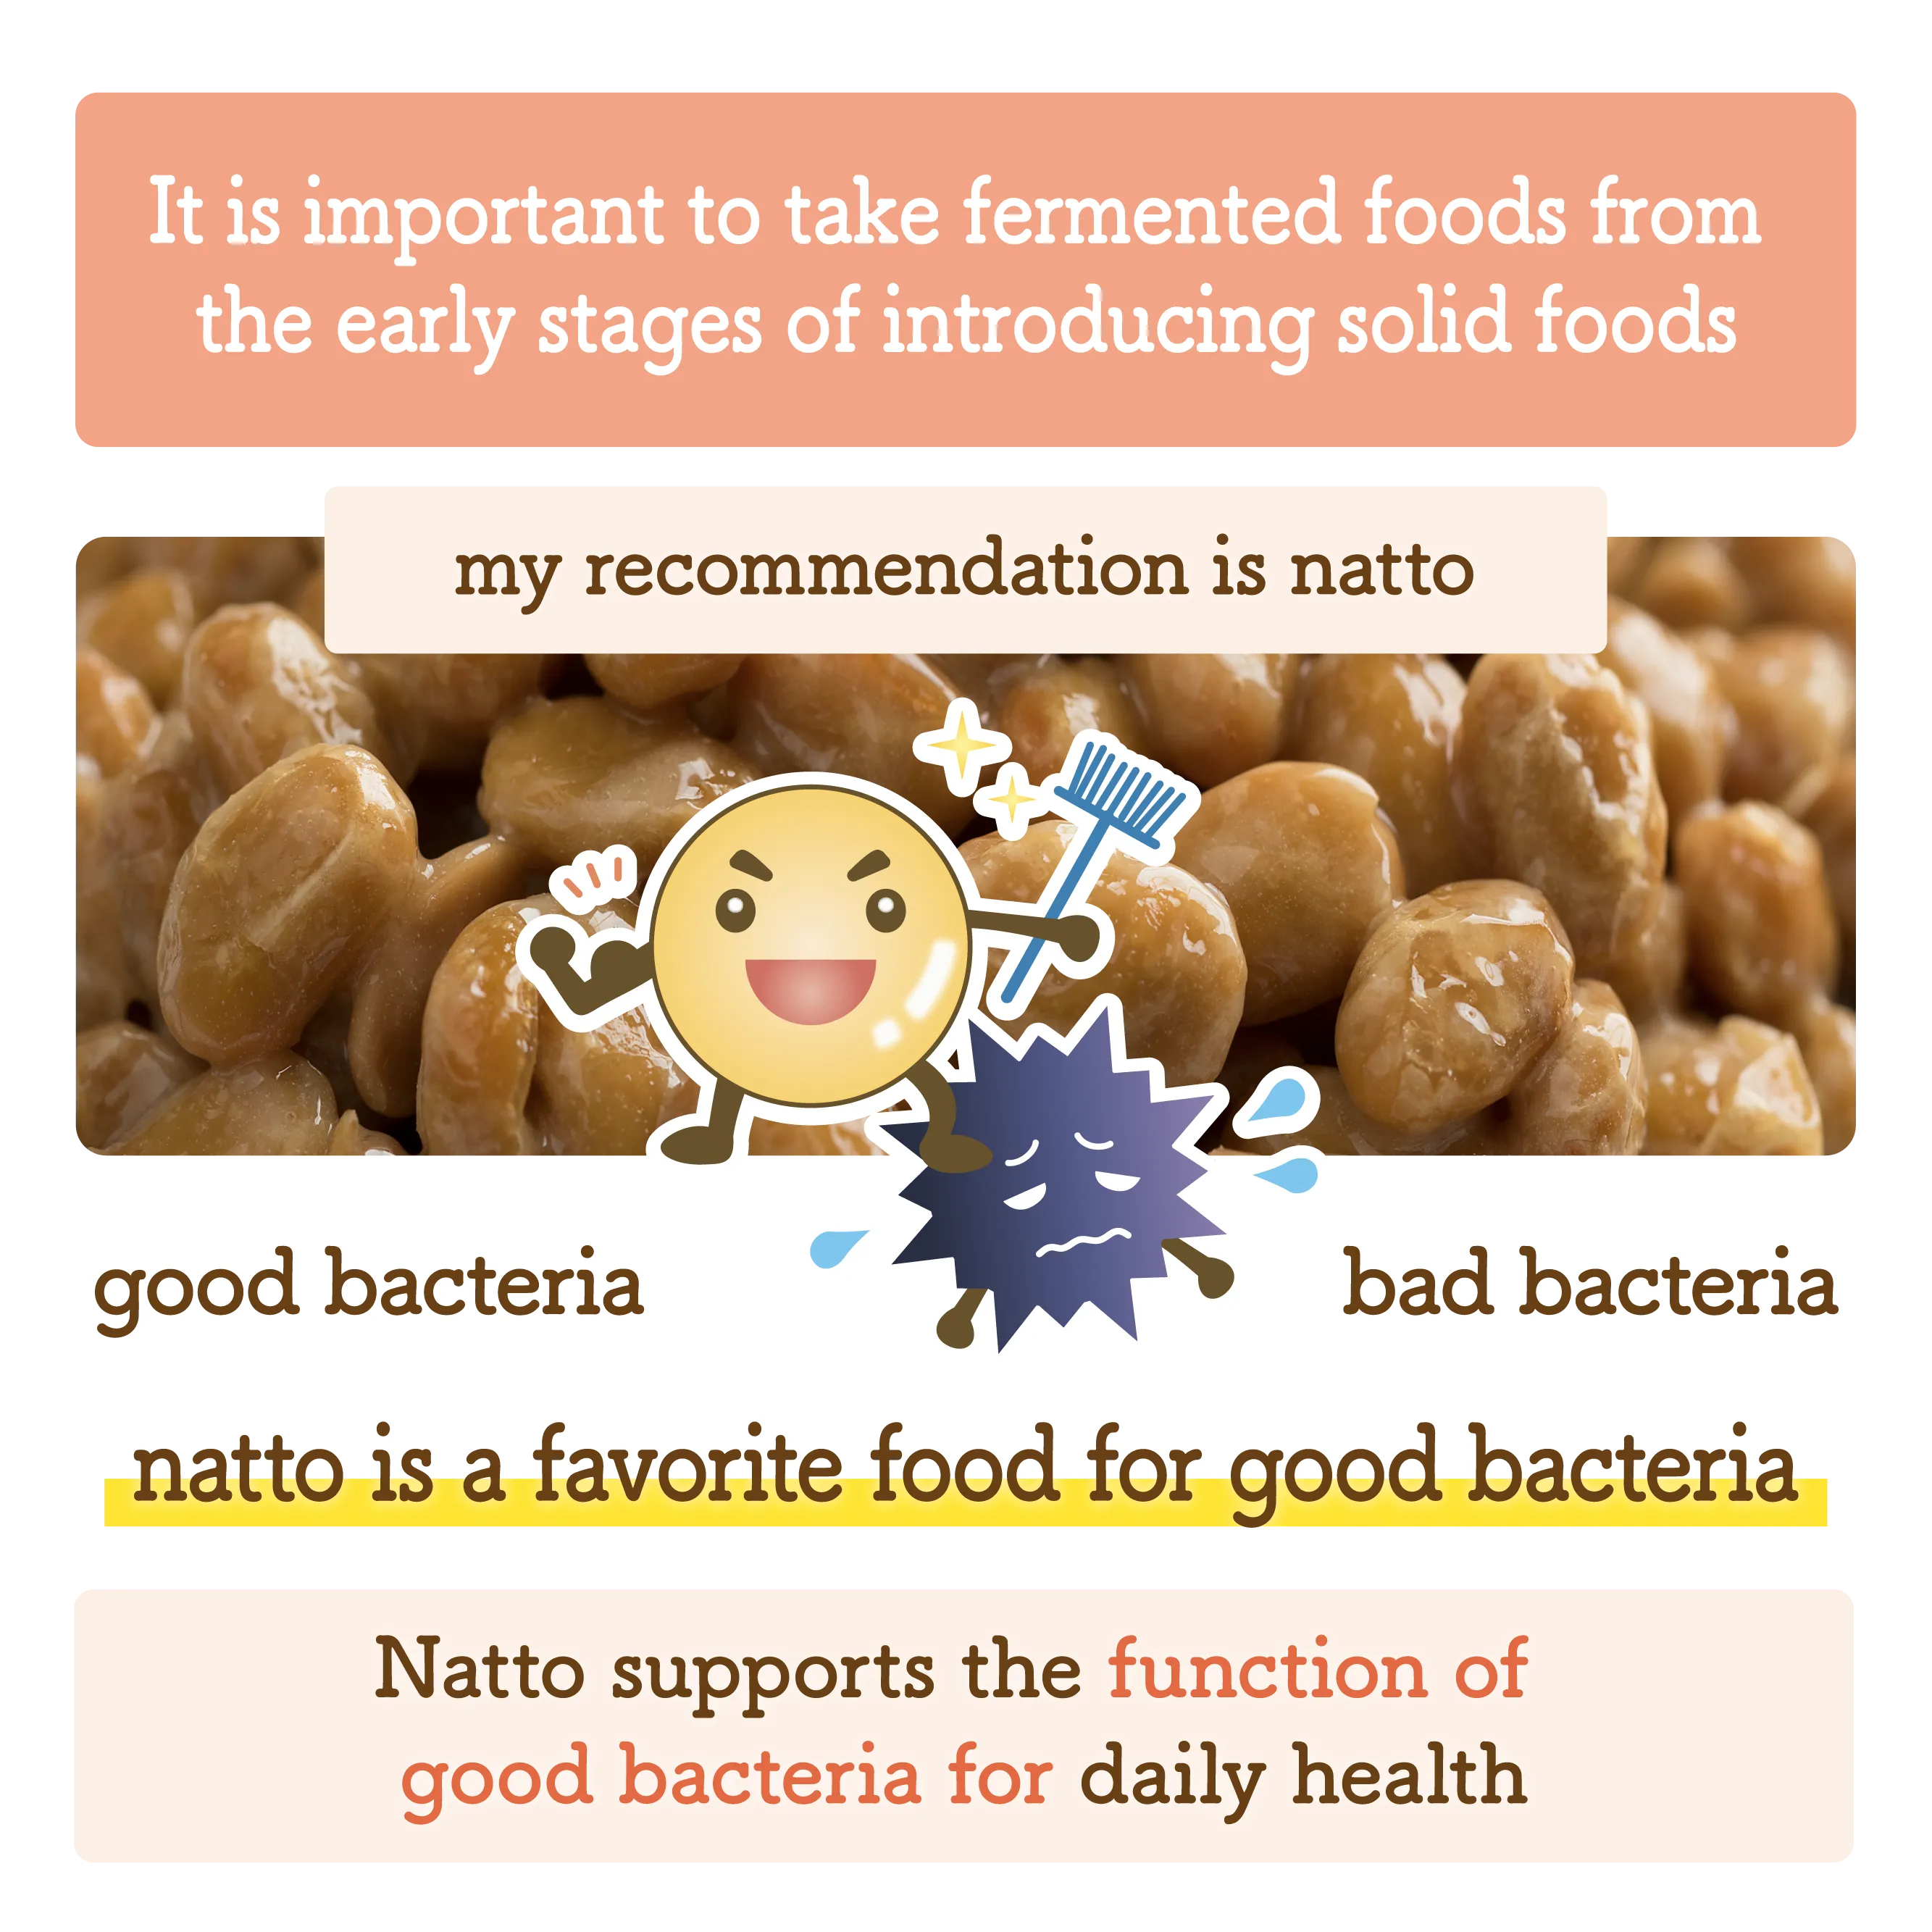 Fermented food from baby food